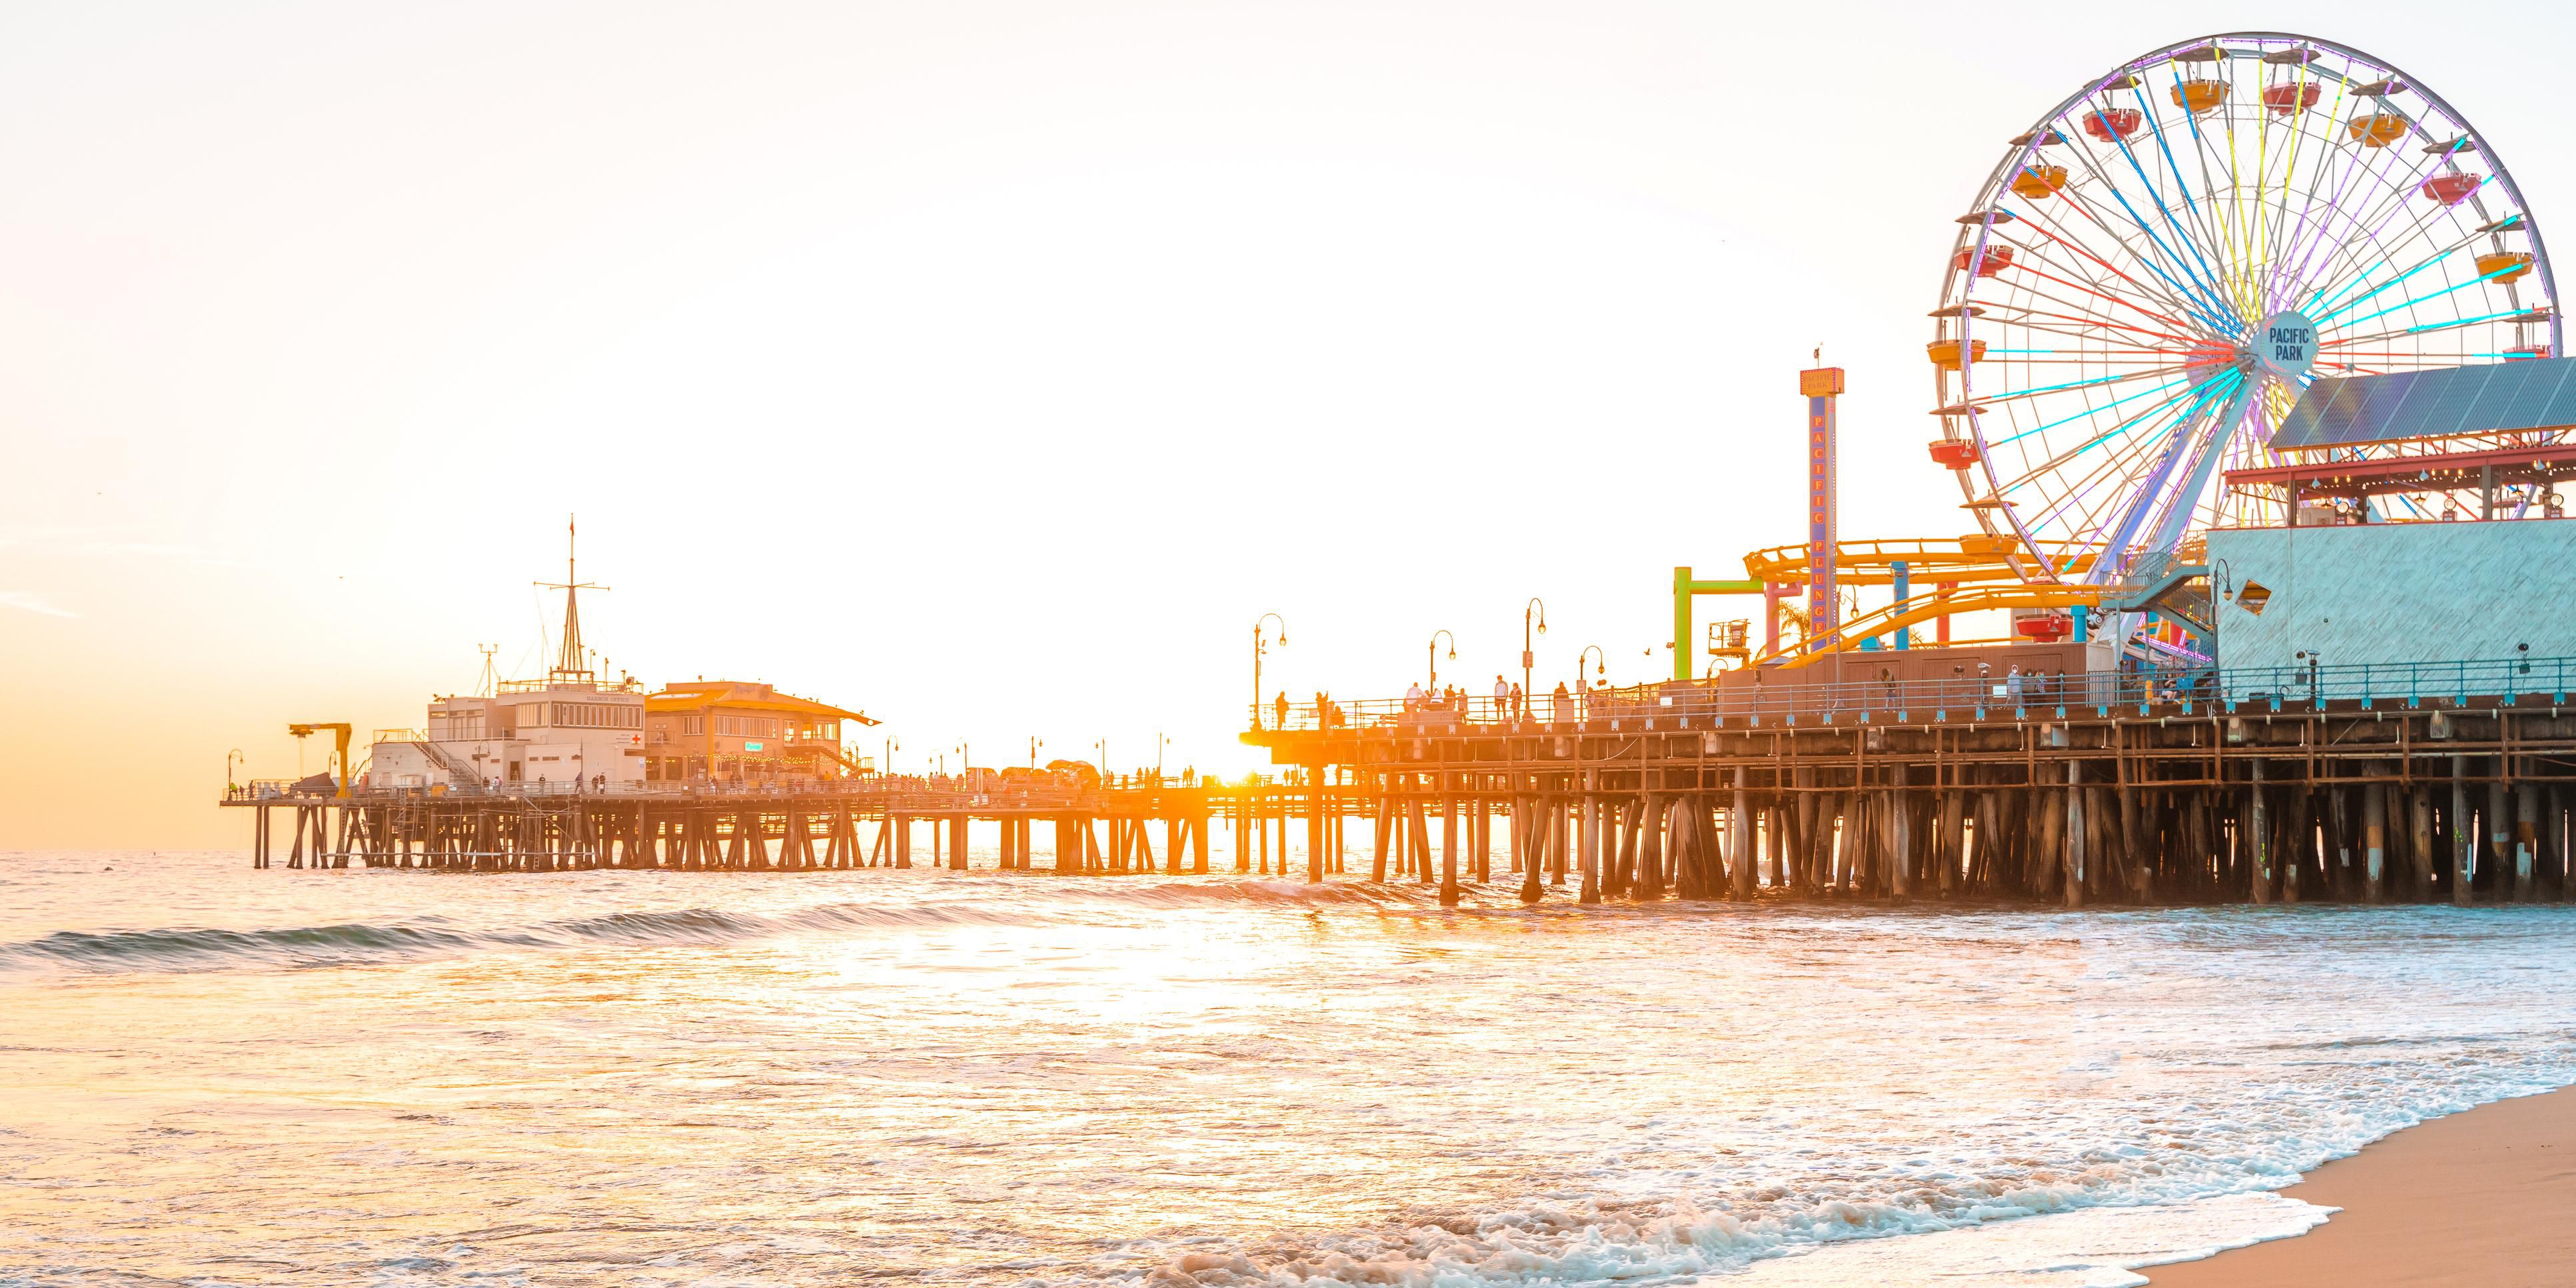 Spend the day in beautiful Santa Monica and discover all the Santa Monica Pier has to offer. Have fun on the pier with rides, attractions, treat shops and delicious eats from local restaurants. The Santa Monica Pier offers fun for the entire family. Book your stay with us today- Santa Monica Pier is just a short drive from the hotel. 